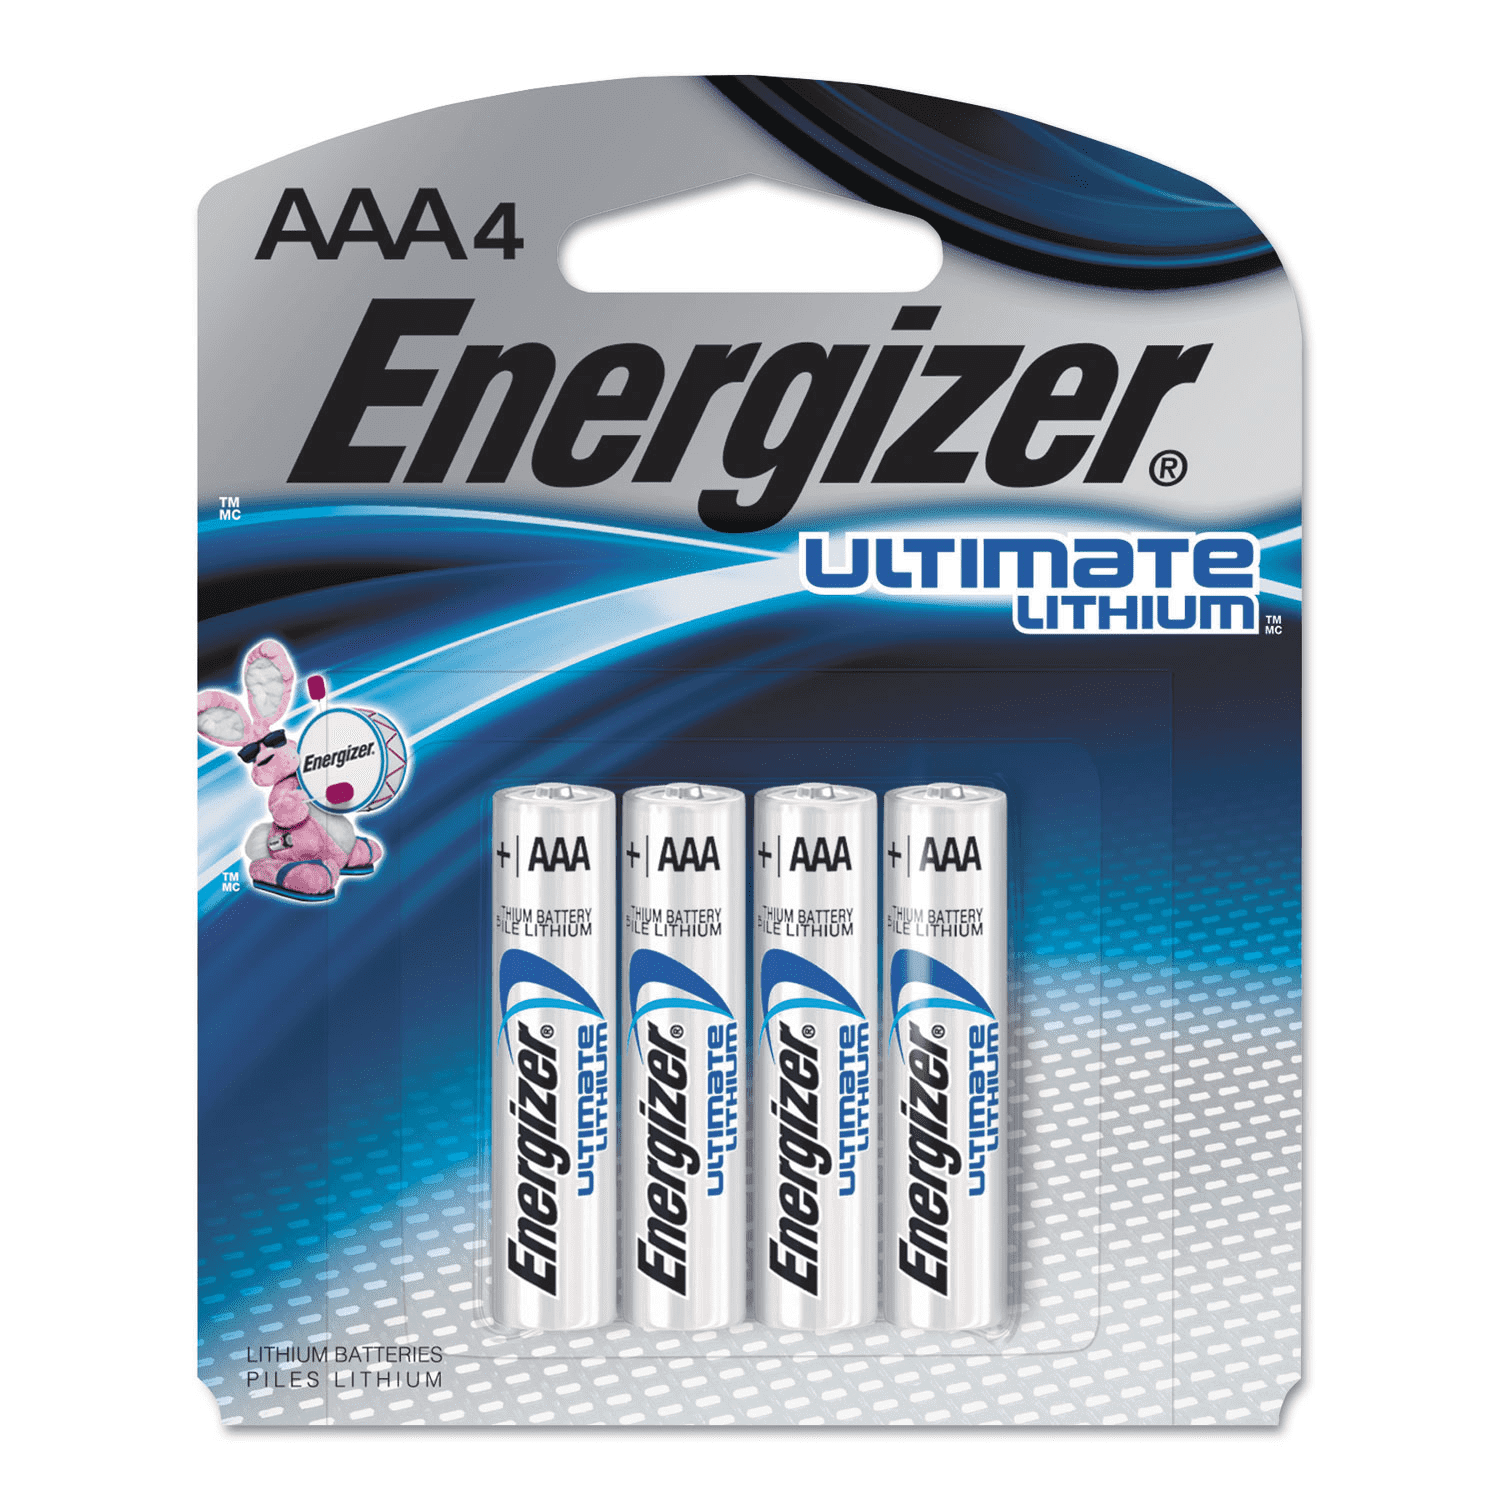 Energizer Ultimate Lithium AAA Batteries – 4 Pack